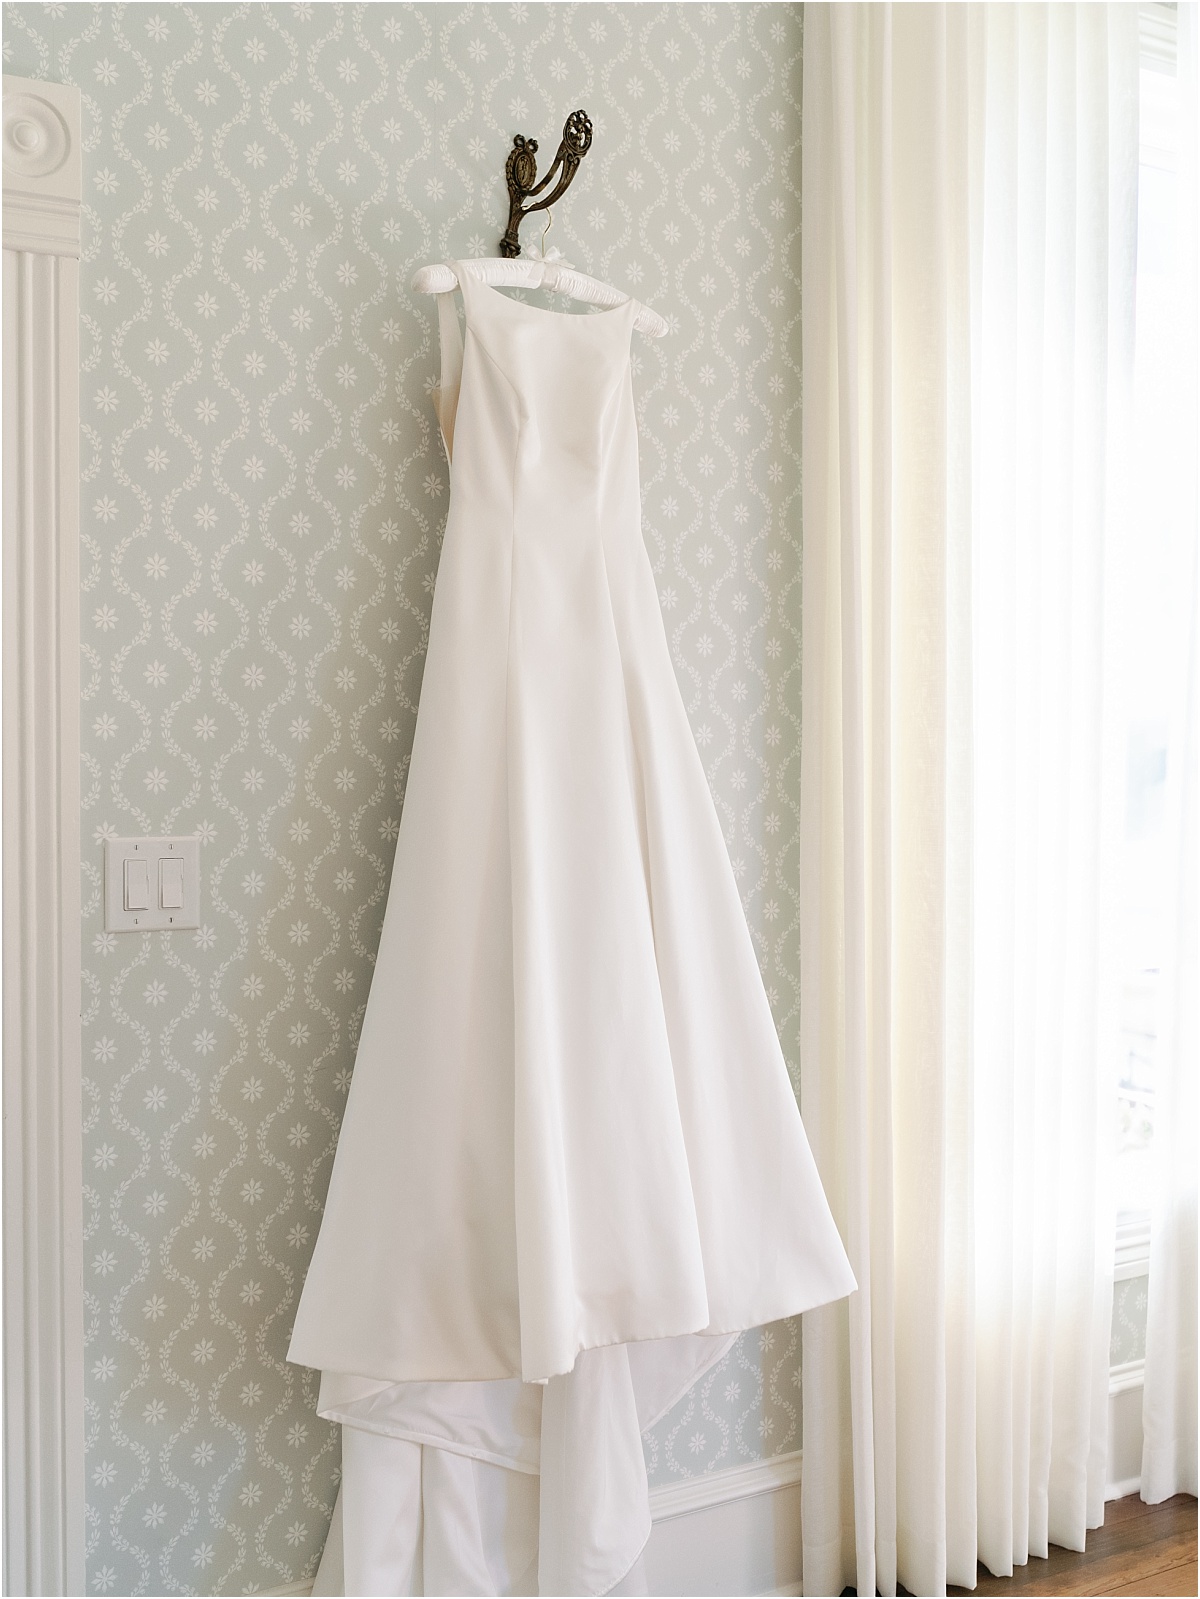 dress hanging in the bridal suite at woodbine mansion